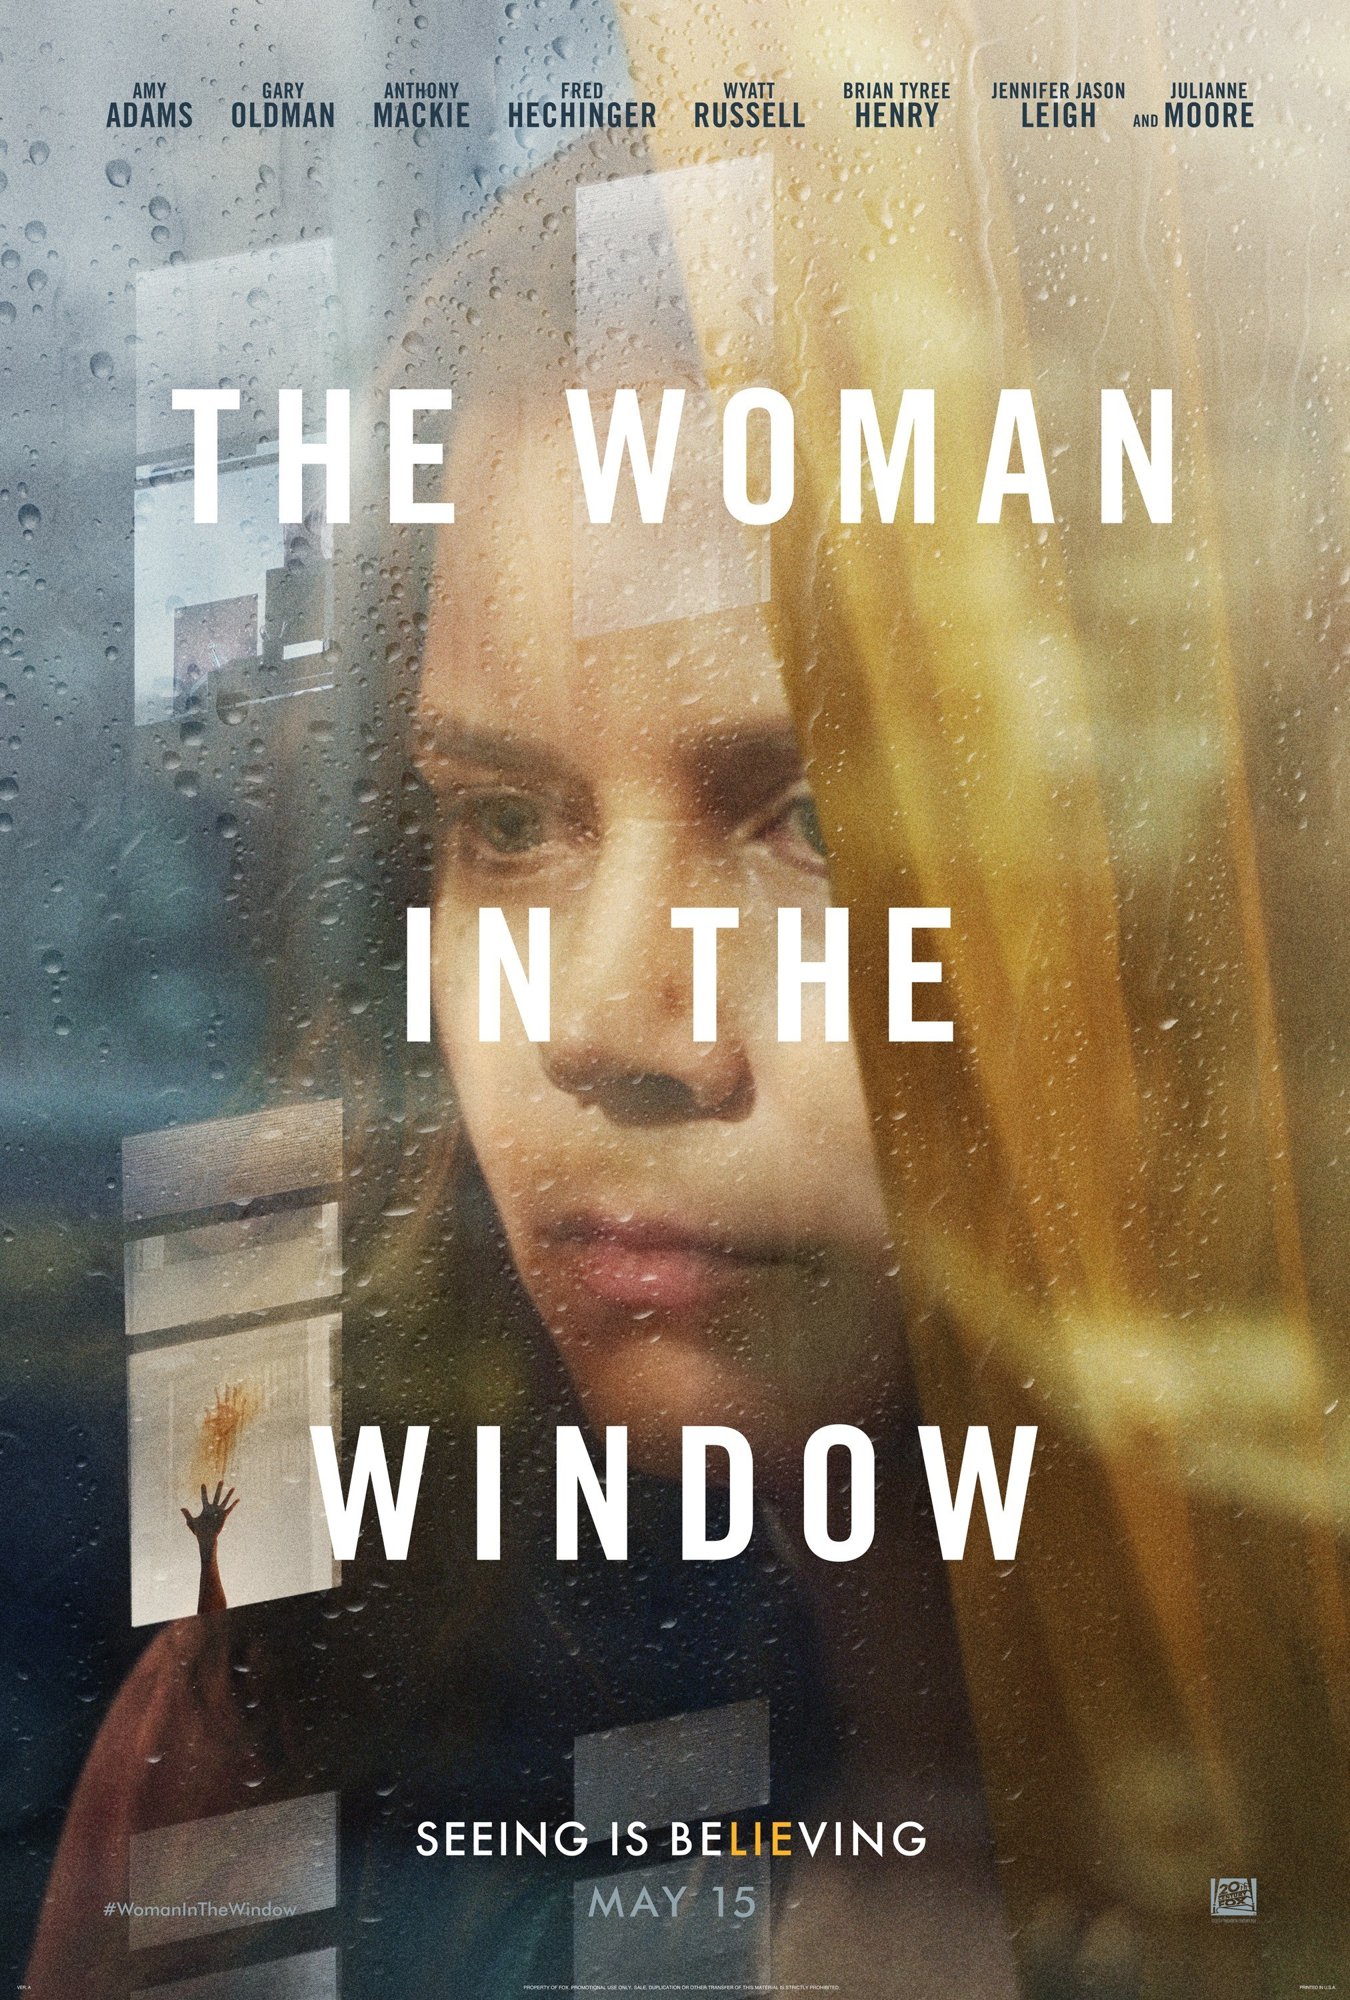 The Woman in the Window (2020) Pictures, Photo, Image and ...